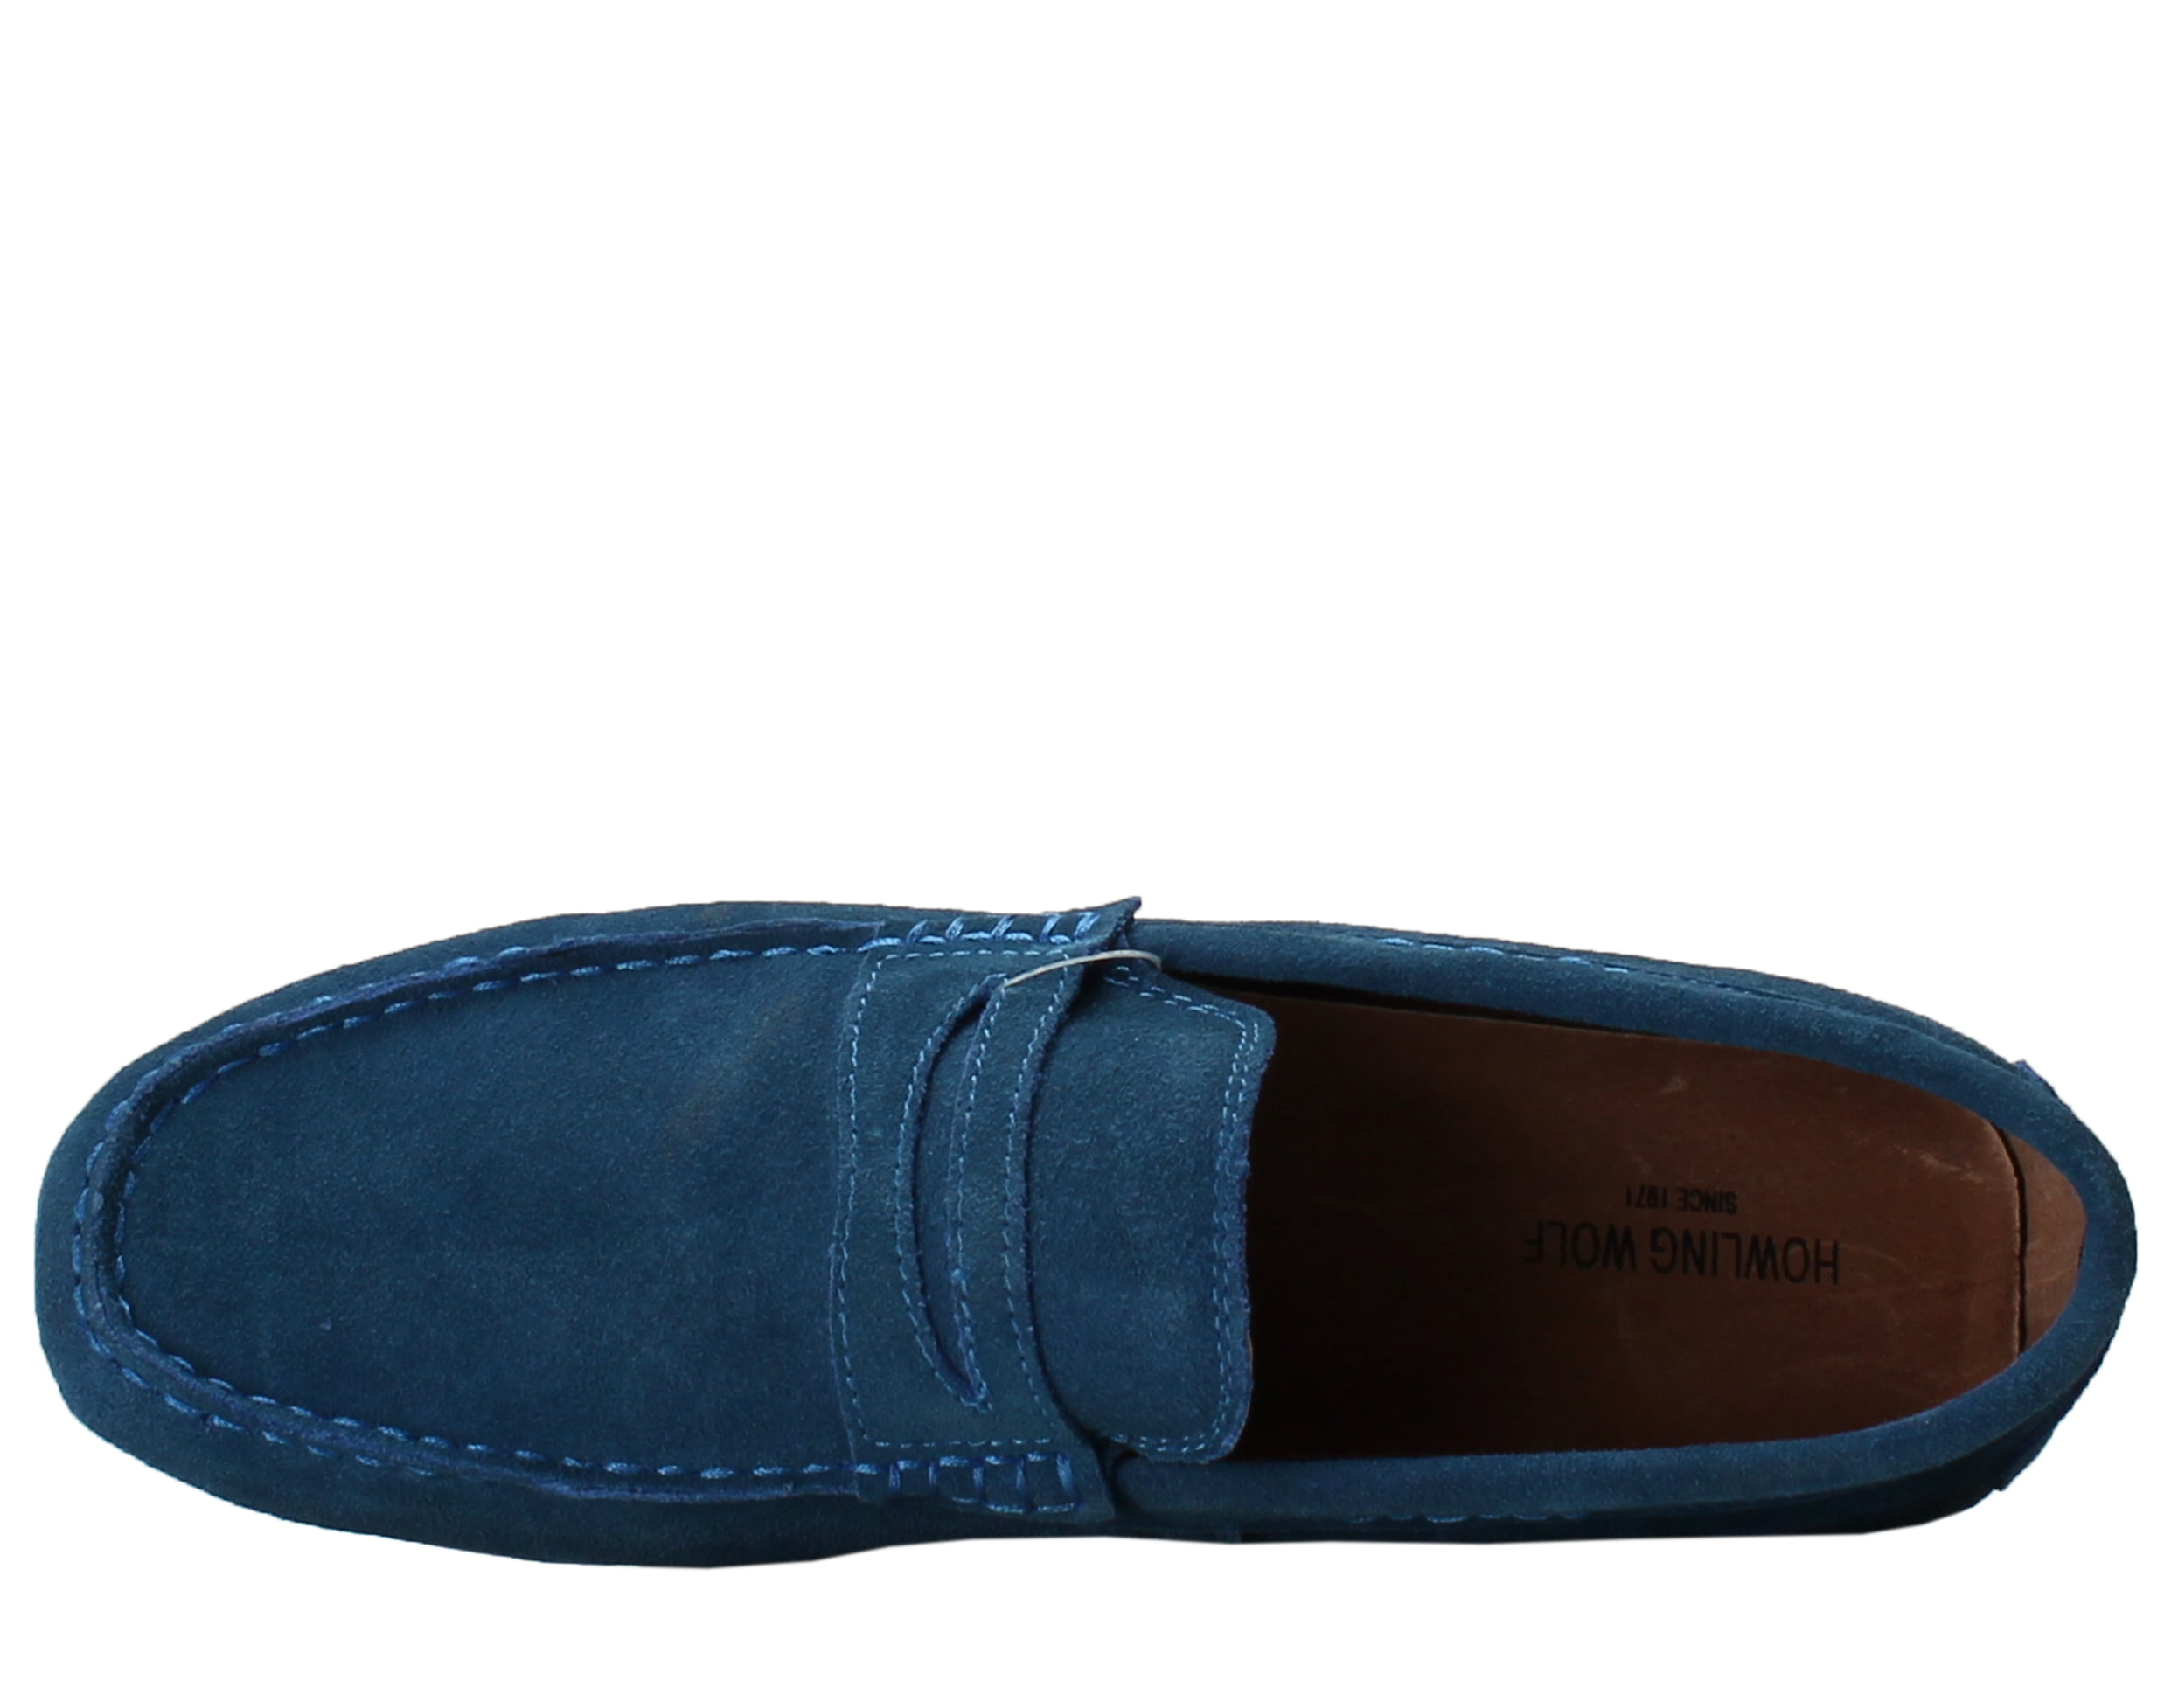 Howling Wolf Milan Penny Loafer Jeans Blue Men's Shoes MILAN-019 Size 7